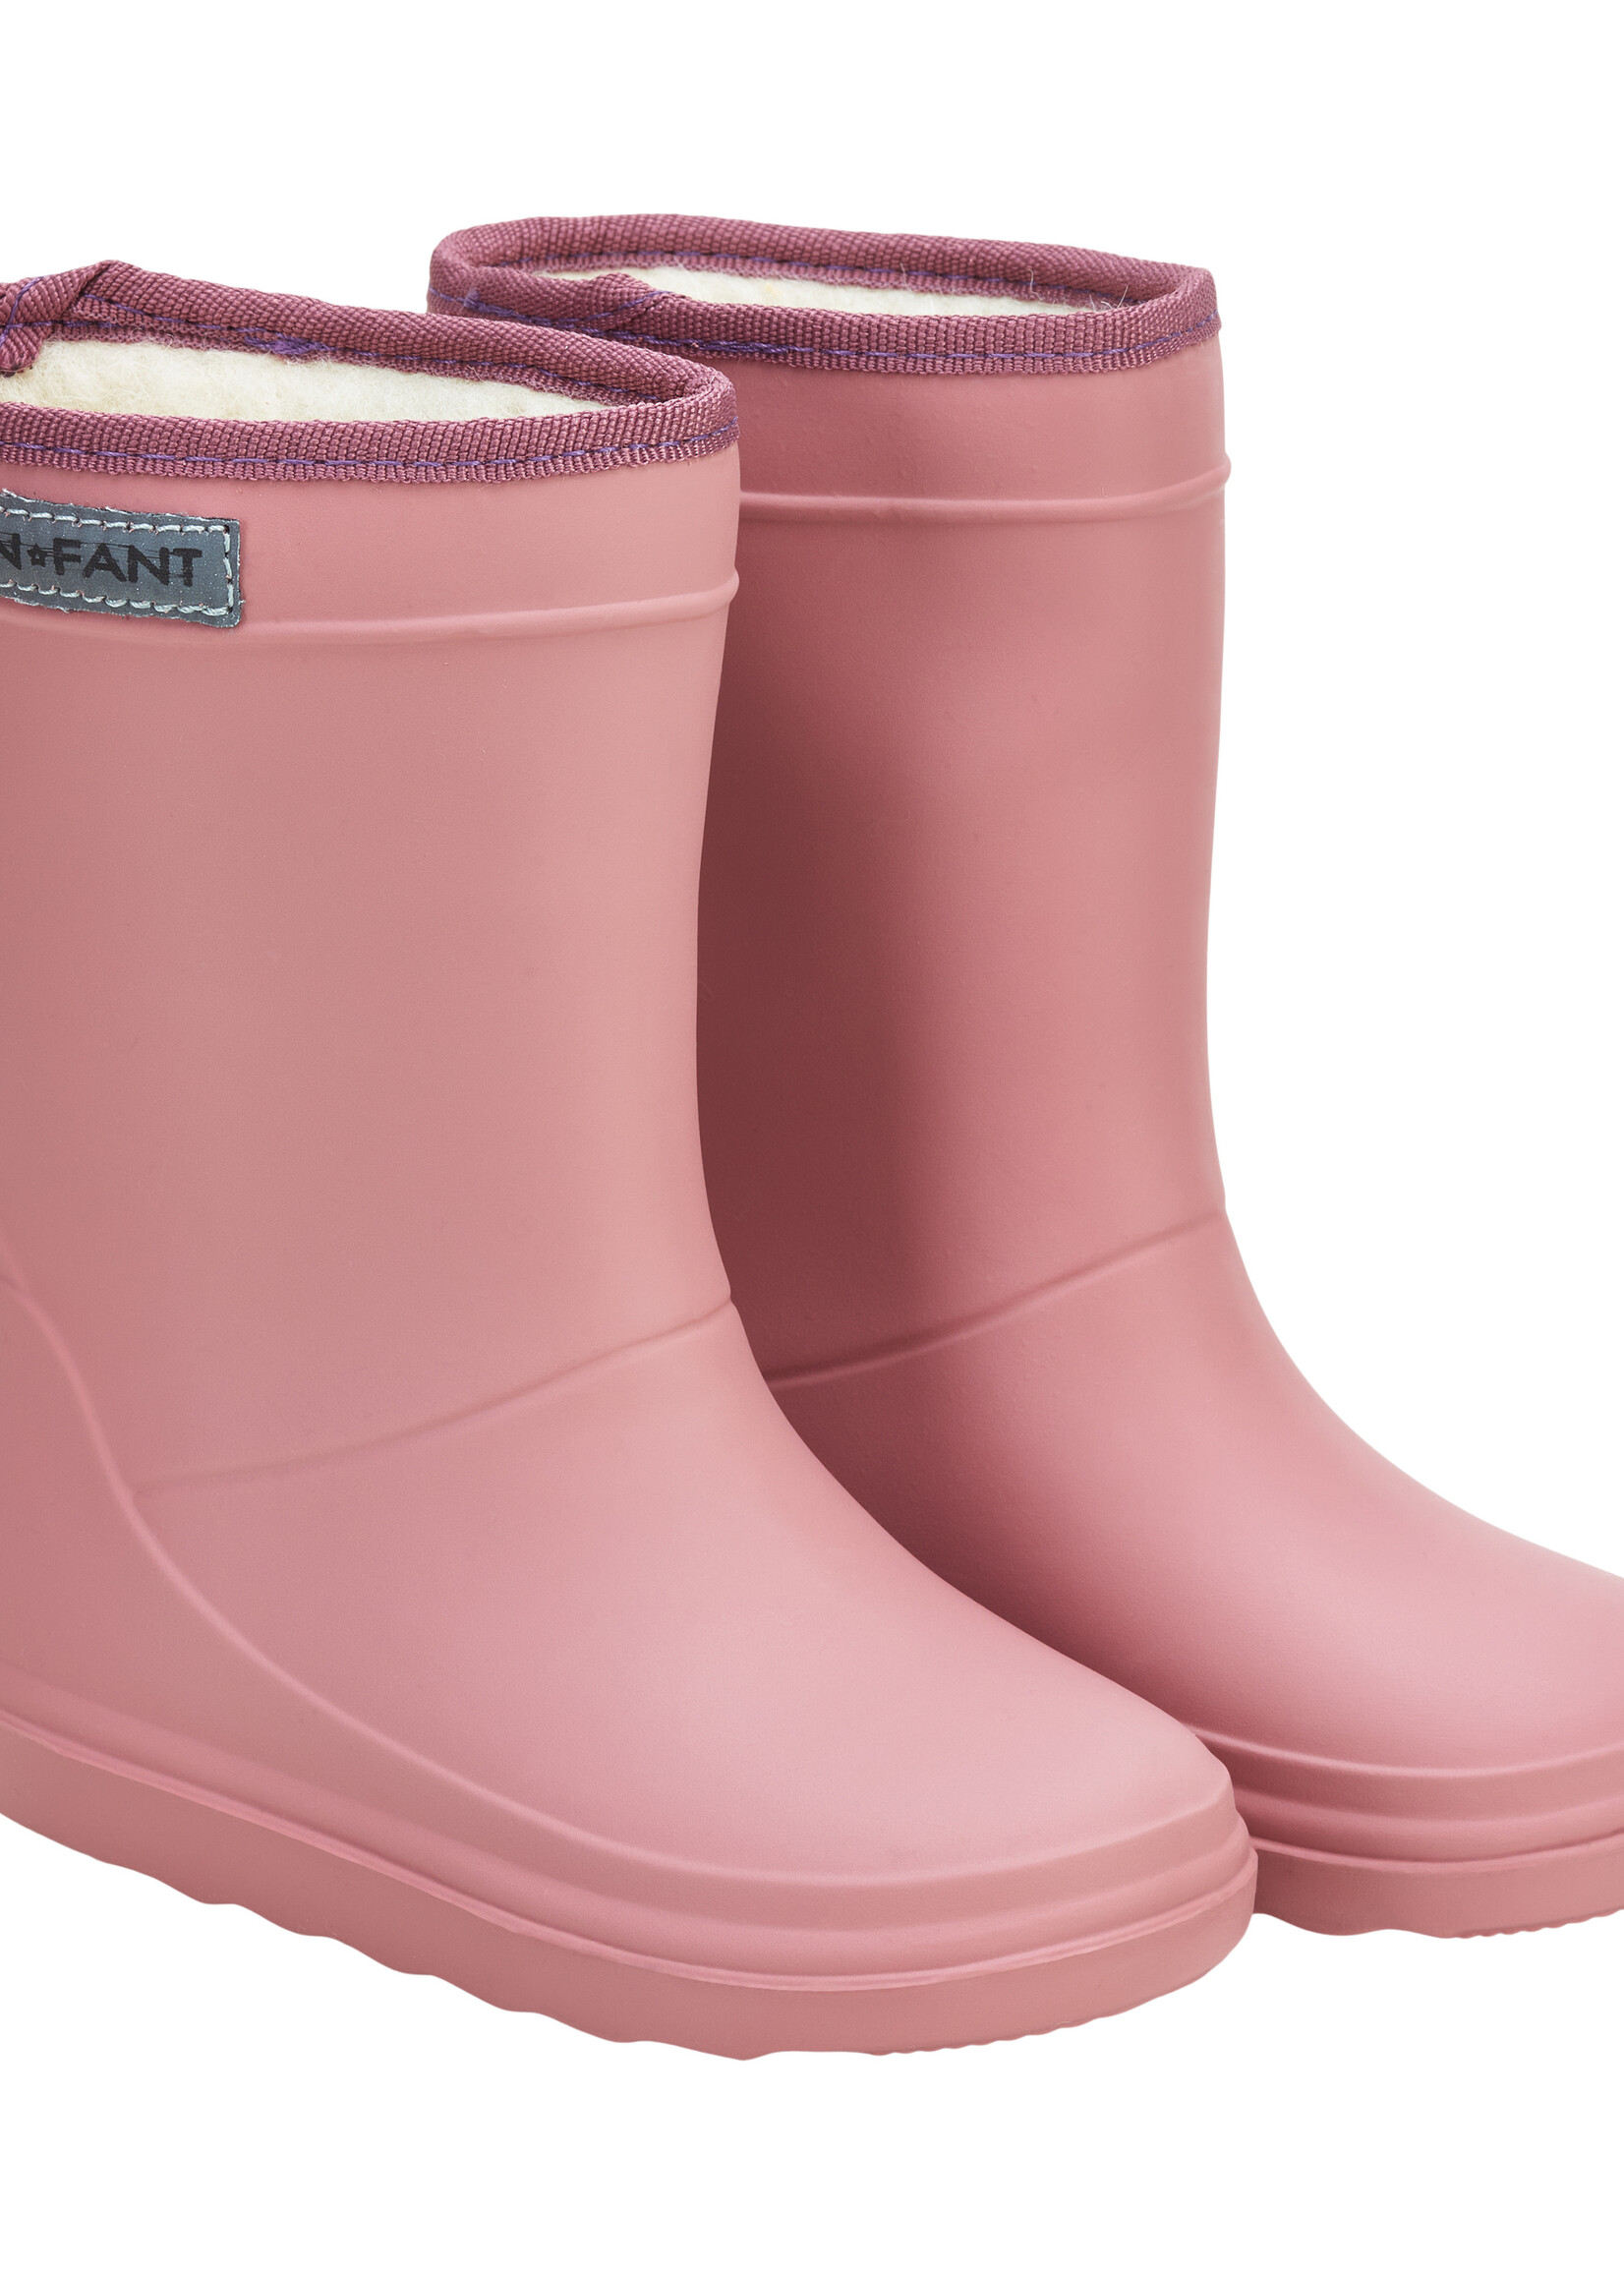 ENFANT Thermo Boots, Old rose, W23